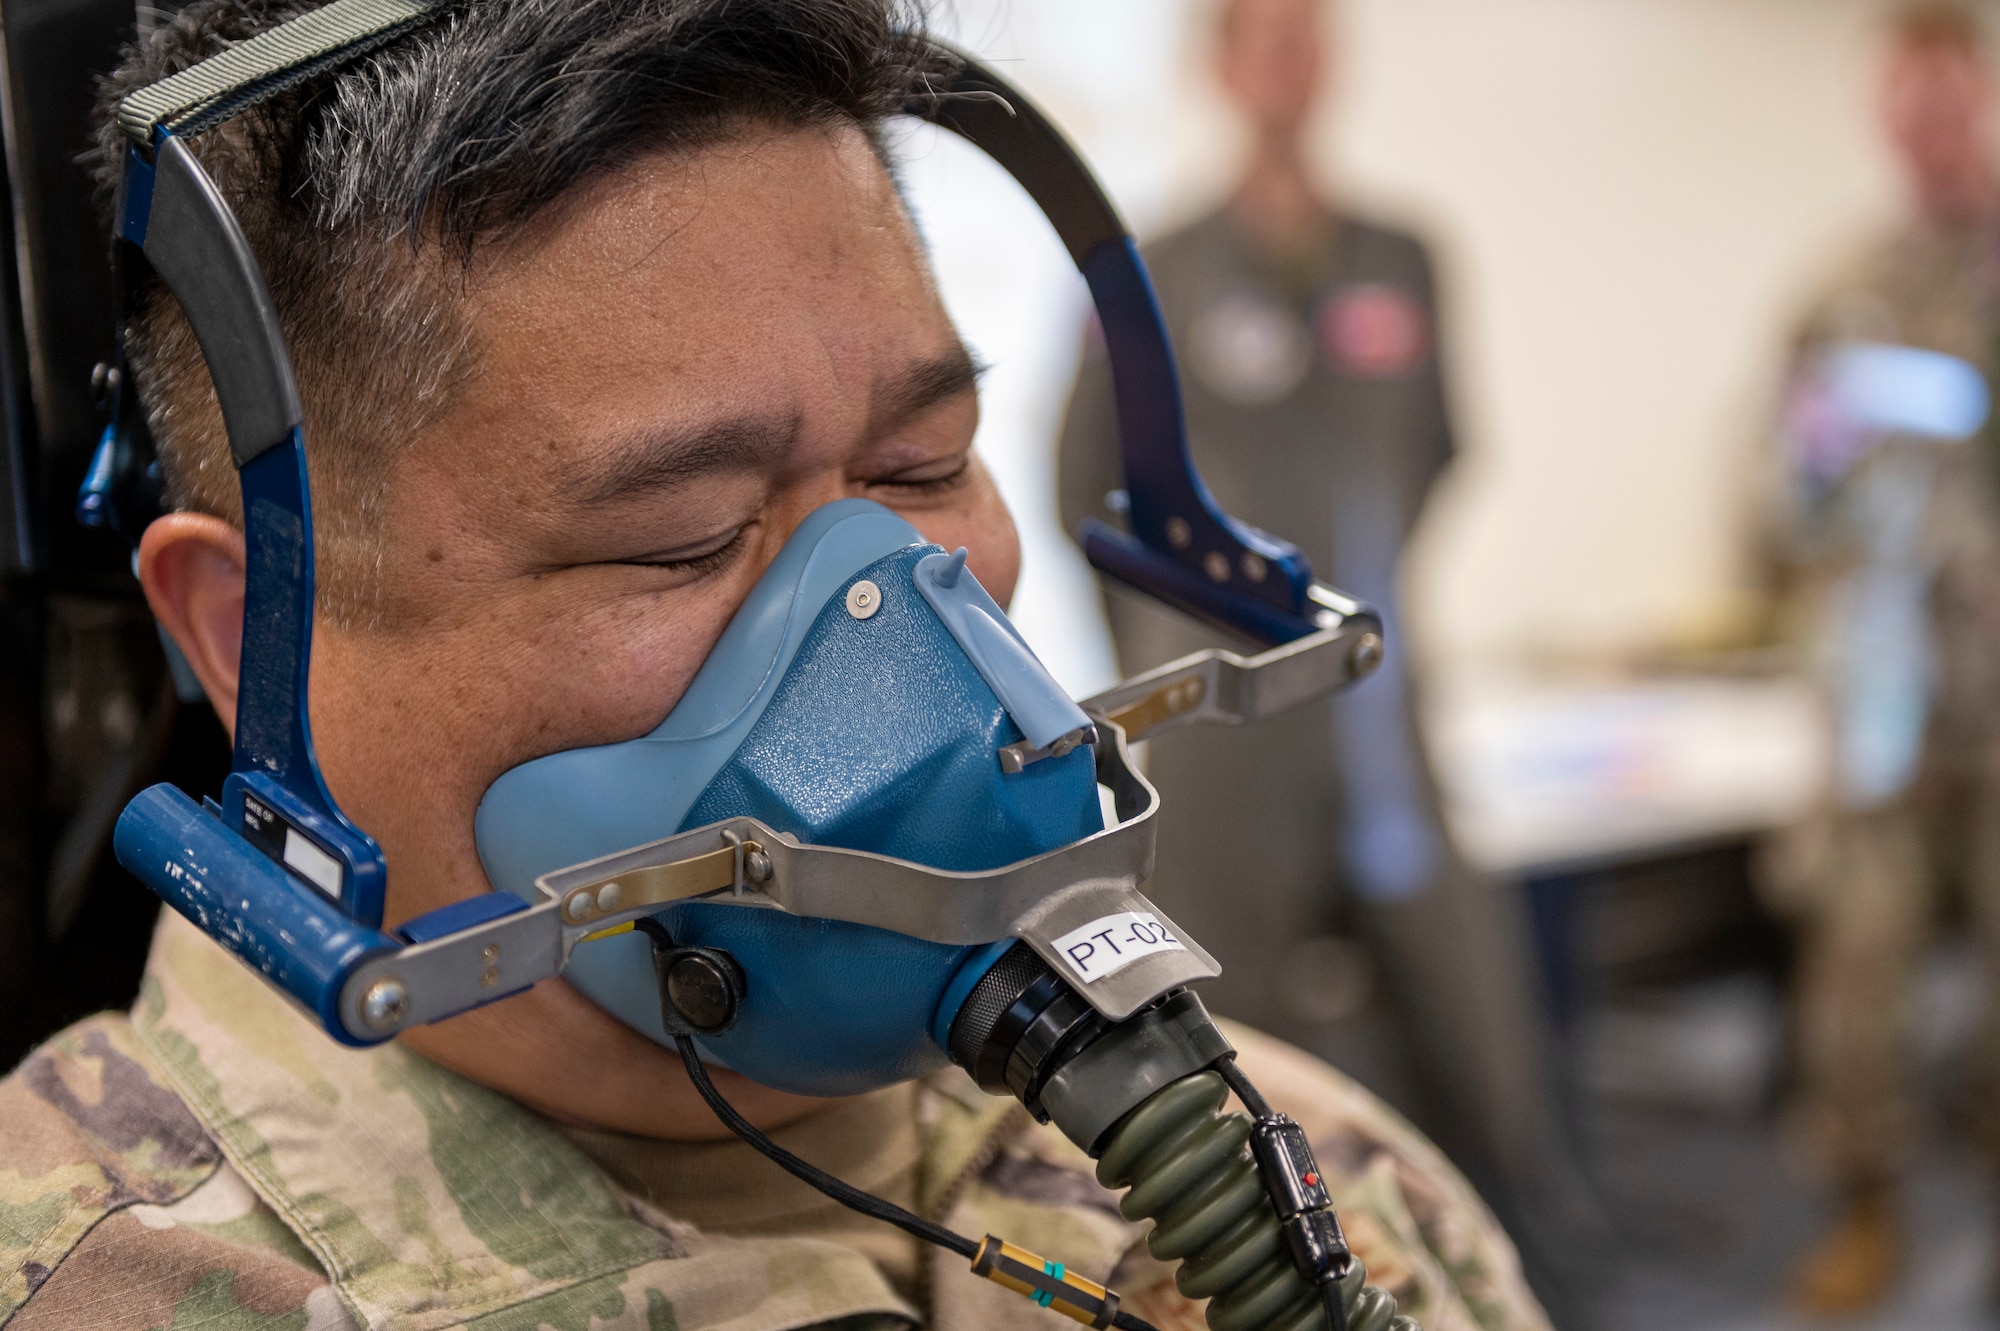 Close up of a soldier's face, wearing a breathing mask, struggling to keep his eyes open.